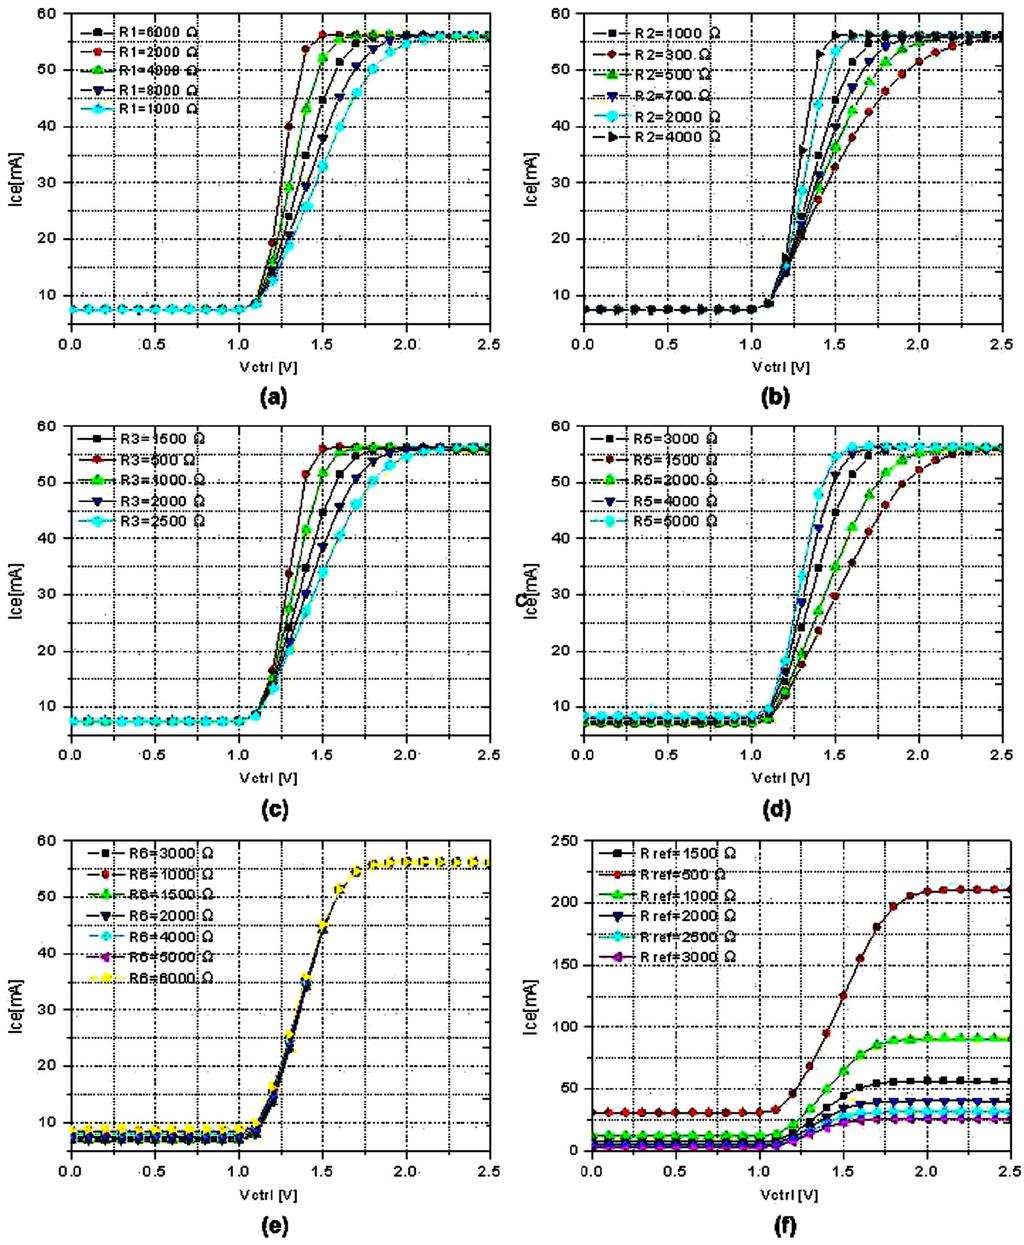 NAM AND KIM: DPA WITH ON-CHIP DYNAMIC BIAS CONTROL CIRCUIT FOR HANDSET APPLICATION 637 Fig. 9. Simulated RF power transistor s dc current curve according to the variation of resistances.